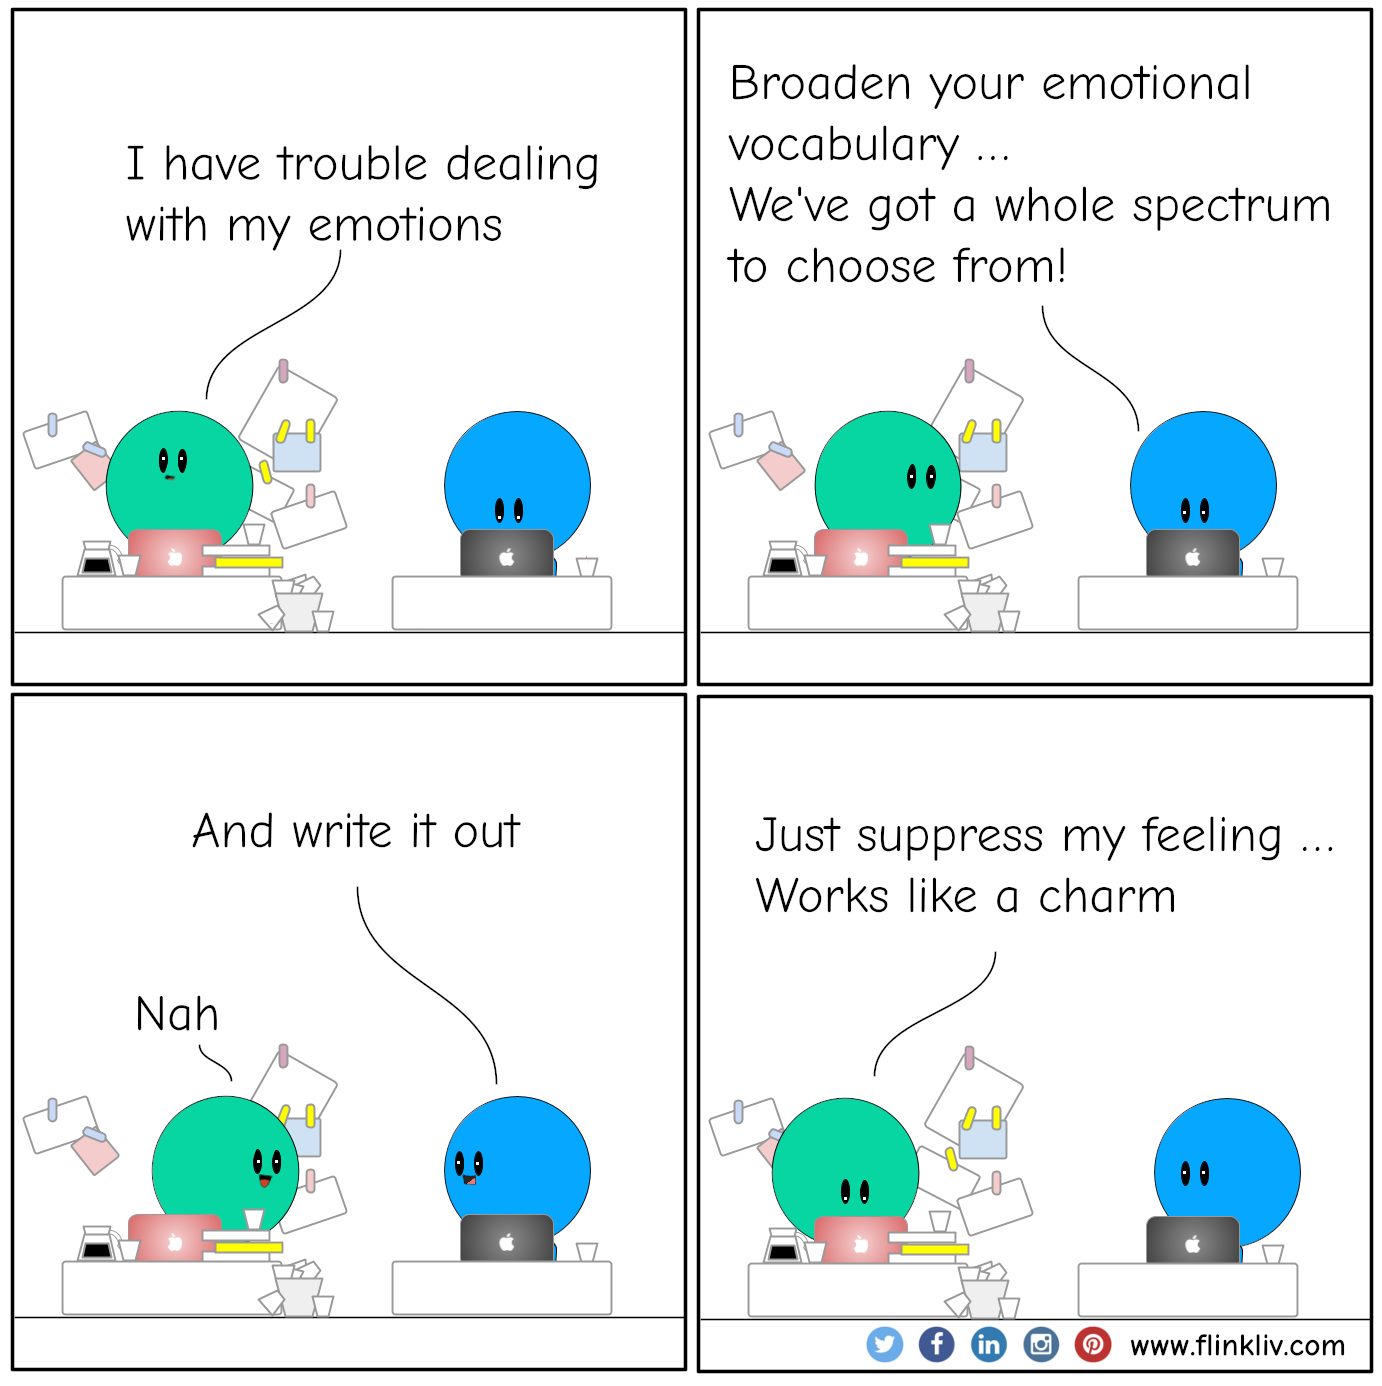 A conversation between A and B about how to understand our emotions A:I have trouble dealing with my emotions. B: Broaden your emotional vocabulary, B: We've got a whole spectrum of emotions to choose from! B: And write it out. B: Cause that's where the real magic happens. By Flinkliv.com